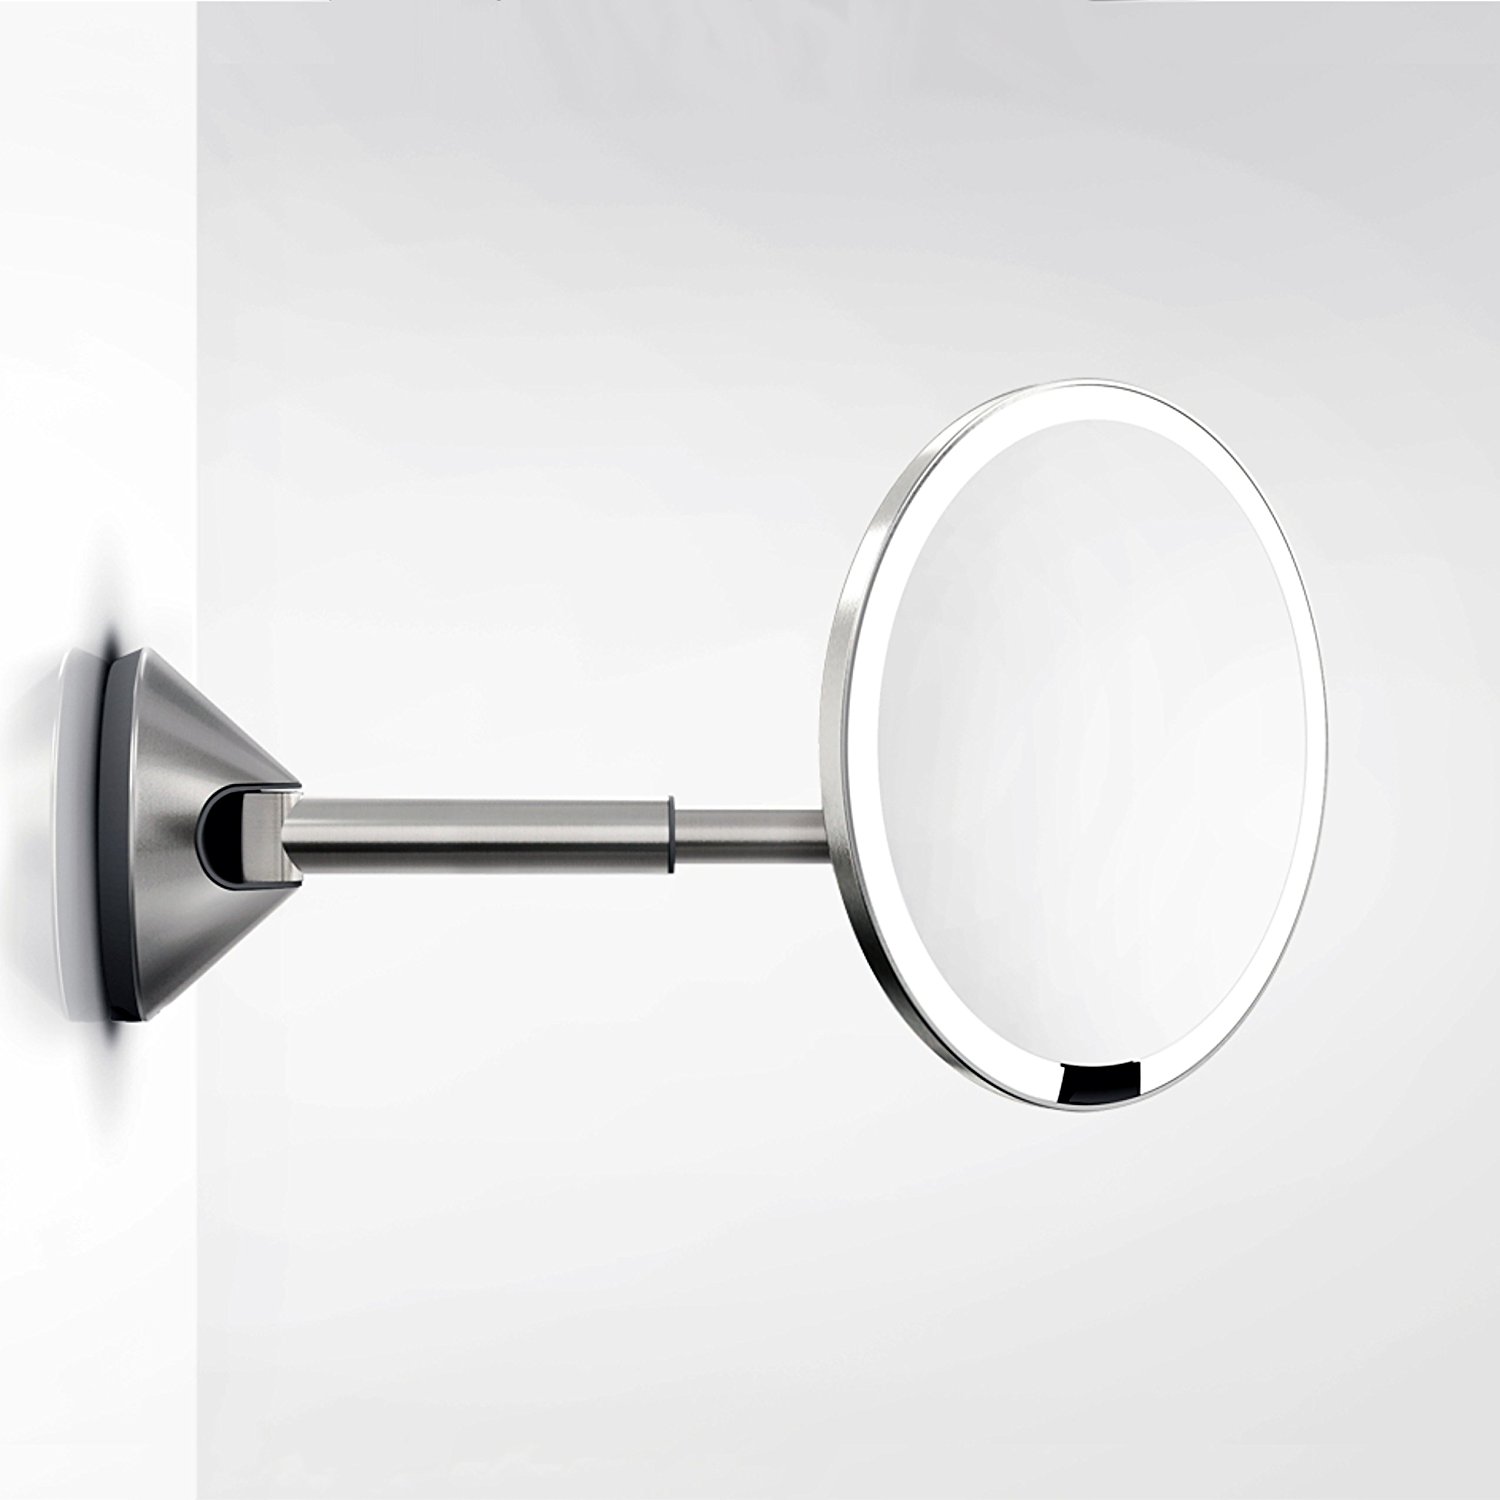 simplehuman 8 inch Wall Mount Sensor Mirror, Lighted Makeup Mirror, Rechargeable 5x Magnification